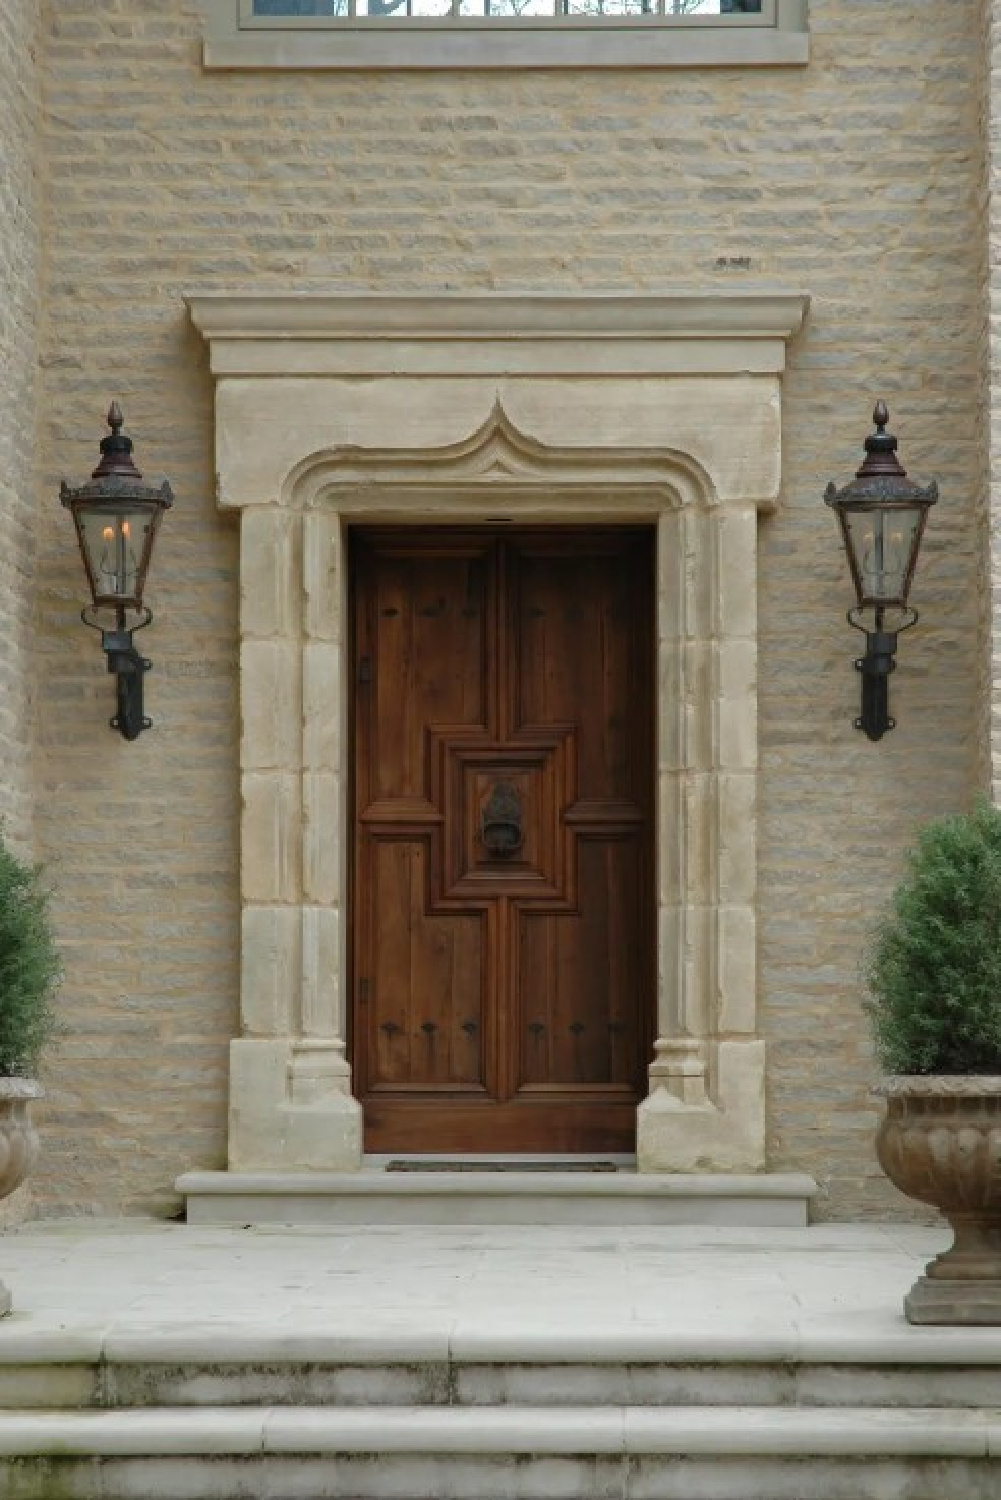 Breathtaking facade with stone, wood door, and lanterns - Jeffrey Dungan Architects. #oldworldstyle